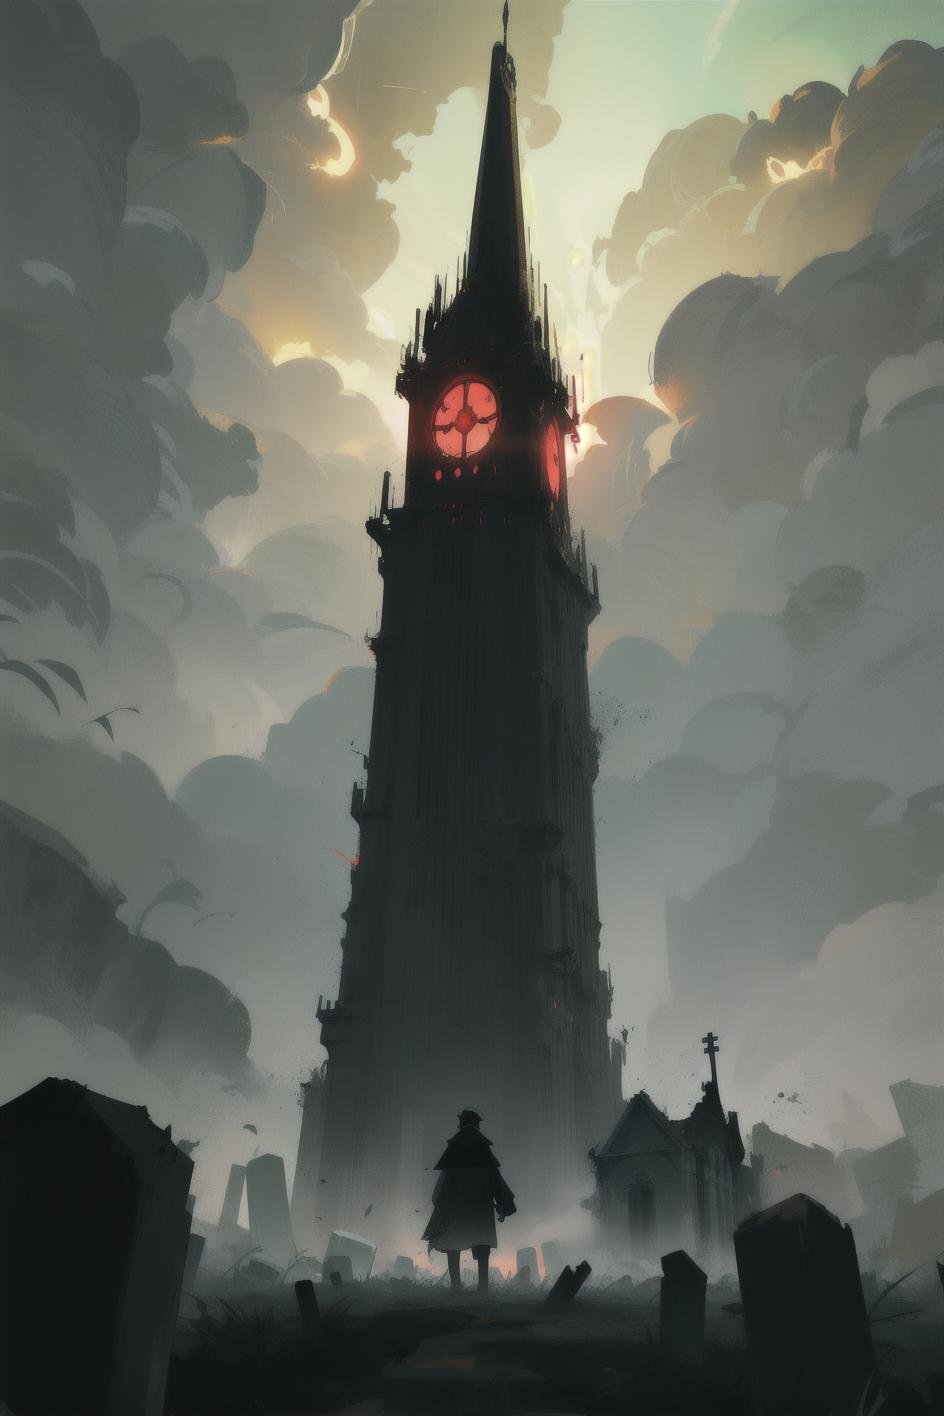 In the heart of a chilling landscape, a black tower emerges atop a desolate mountain, its sinister silhouette dominating the scene. Set to the side of the frame, the tower exudes an aura of malevolence against the backdrop of an eerie, almost monochromatic green hue that permeates the air. The very atmosphere seems to pulse with an unsettling glow, casting a haunting pallor over the surroundings.The tower stands as a monument to darkness, its jagged spires reaching upward like skeletal fingers clawing at the sky. The architecture exudes an aura of decay and abandonment, hinting at ancient secrets hidden within its obsidian walls.The foreground is engulfed in an ominous fog, tendrils of ghostly mist winding their way around the base of the tower and through a crumbling cemetery. Tombstones lean at odd angles, their surfaces worn and cracked with age. The inscriptions on the headstones appear weathered and nearly illegible, a haunting reminder of lives long past.A bolt of lightning splits the sky, casting an eerie, transient glow over the scene. The flash of light reveals glimpses of the tower's details and the cemetery's macabre beauty, only to plunge them back into shadow moments later.The composition is epic and foreboding, with the black tower looming as a dark sentinel against the stormy heavens. The hazy green monochrome palette lends a sinister and otherworldly quality, while the intermittent flashes of lightning add an unsettling sense of motion and life to the stillness of the scene.This is a painting that evokes the spirit of Halloween, capturing the essence of a haunting and mysterious night. The chilling ambiance, the ominous tower, and the graveyard shrouded in fog come together to create a visual narrative that invites viewers to explore the eerie depths of this captivating and gloomy world.